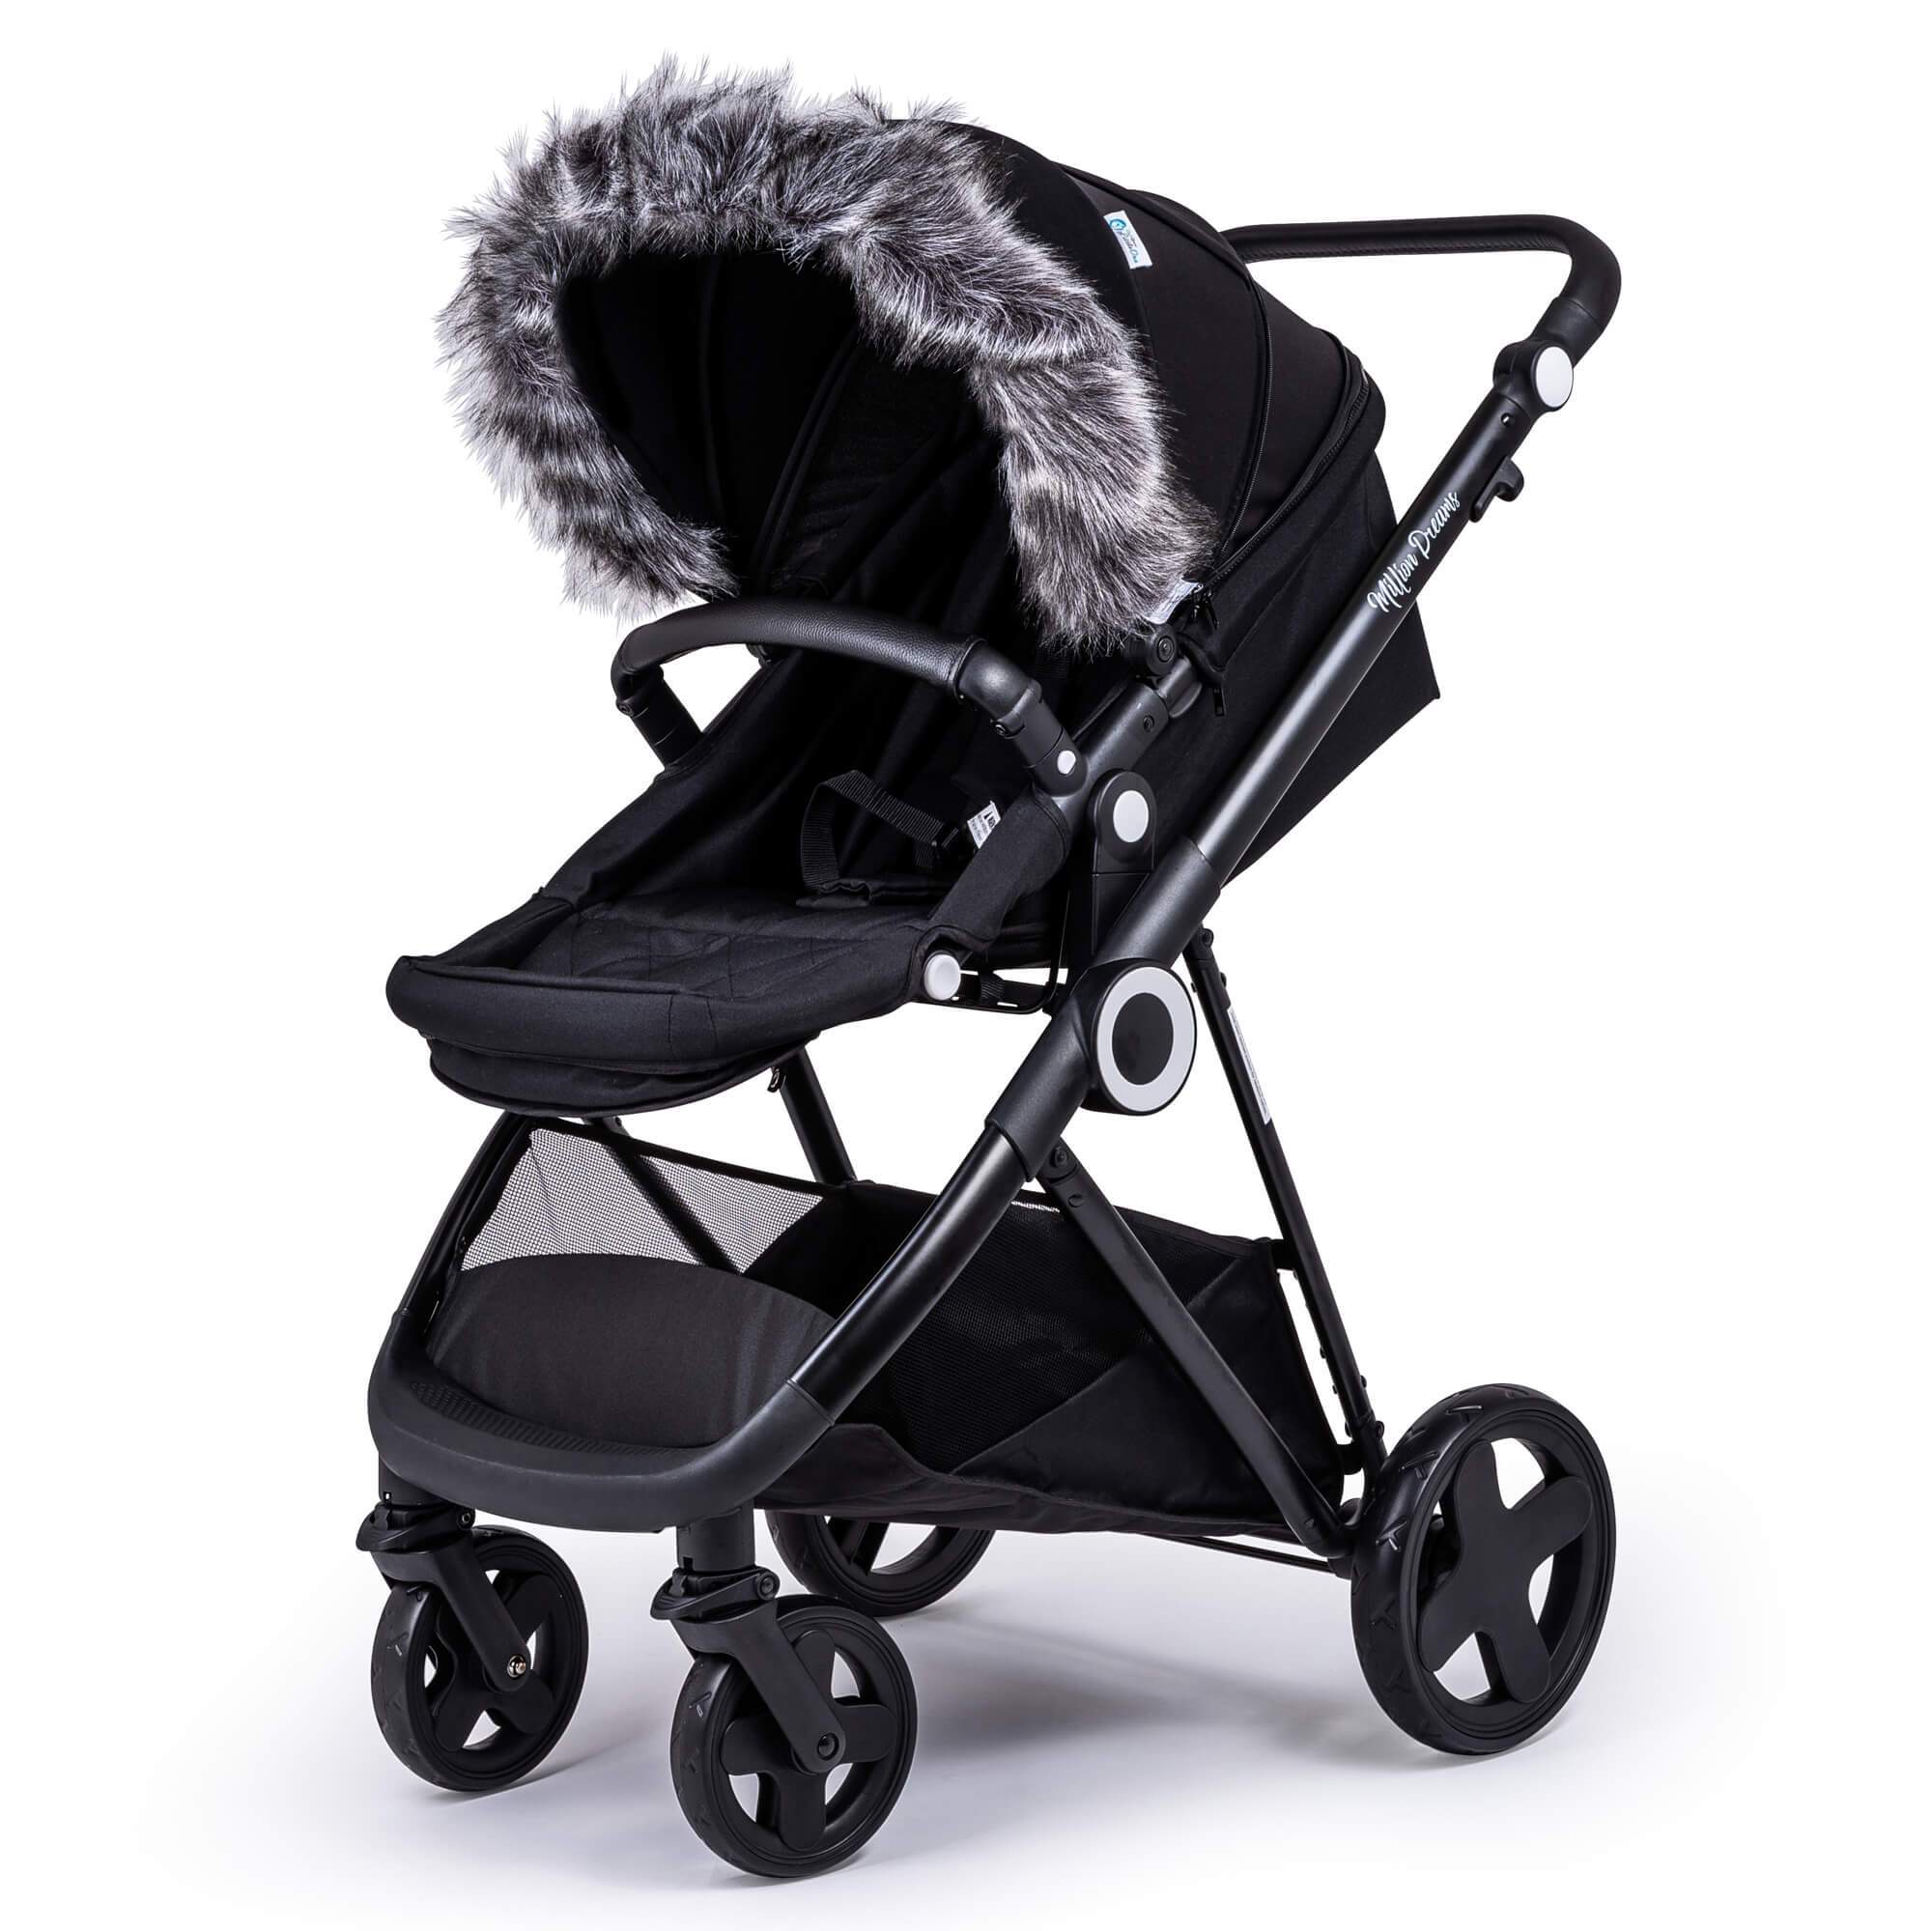 Pram Fur Hood Trim Attachment for Pushchair Compatible with Noukies - Dark Grey / Fits All Models | For Your Little One